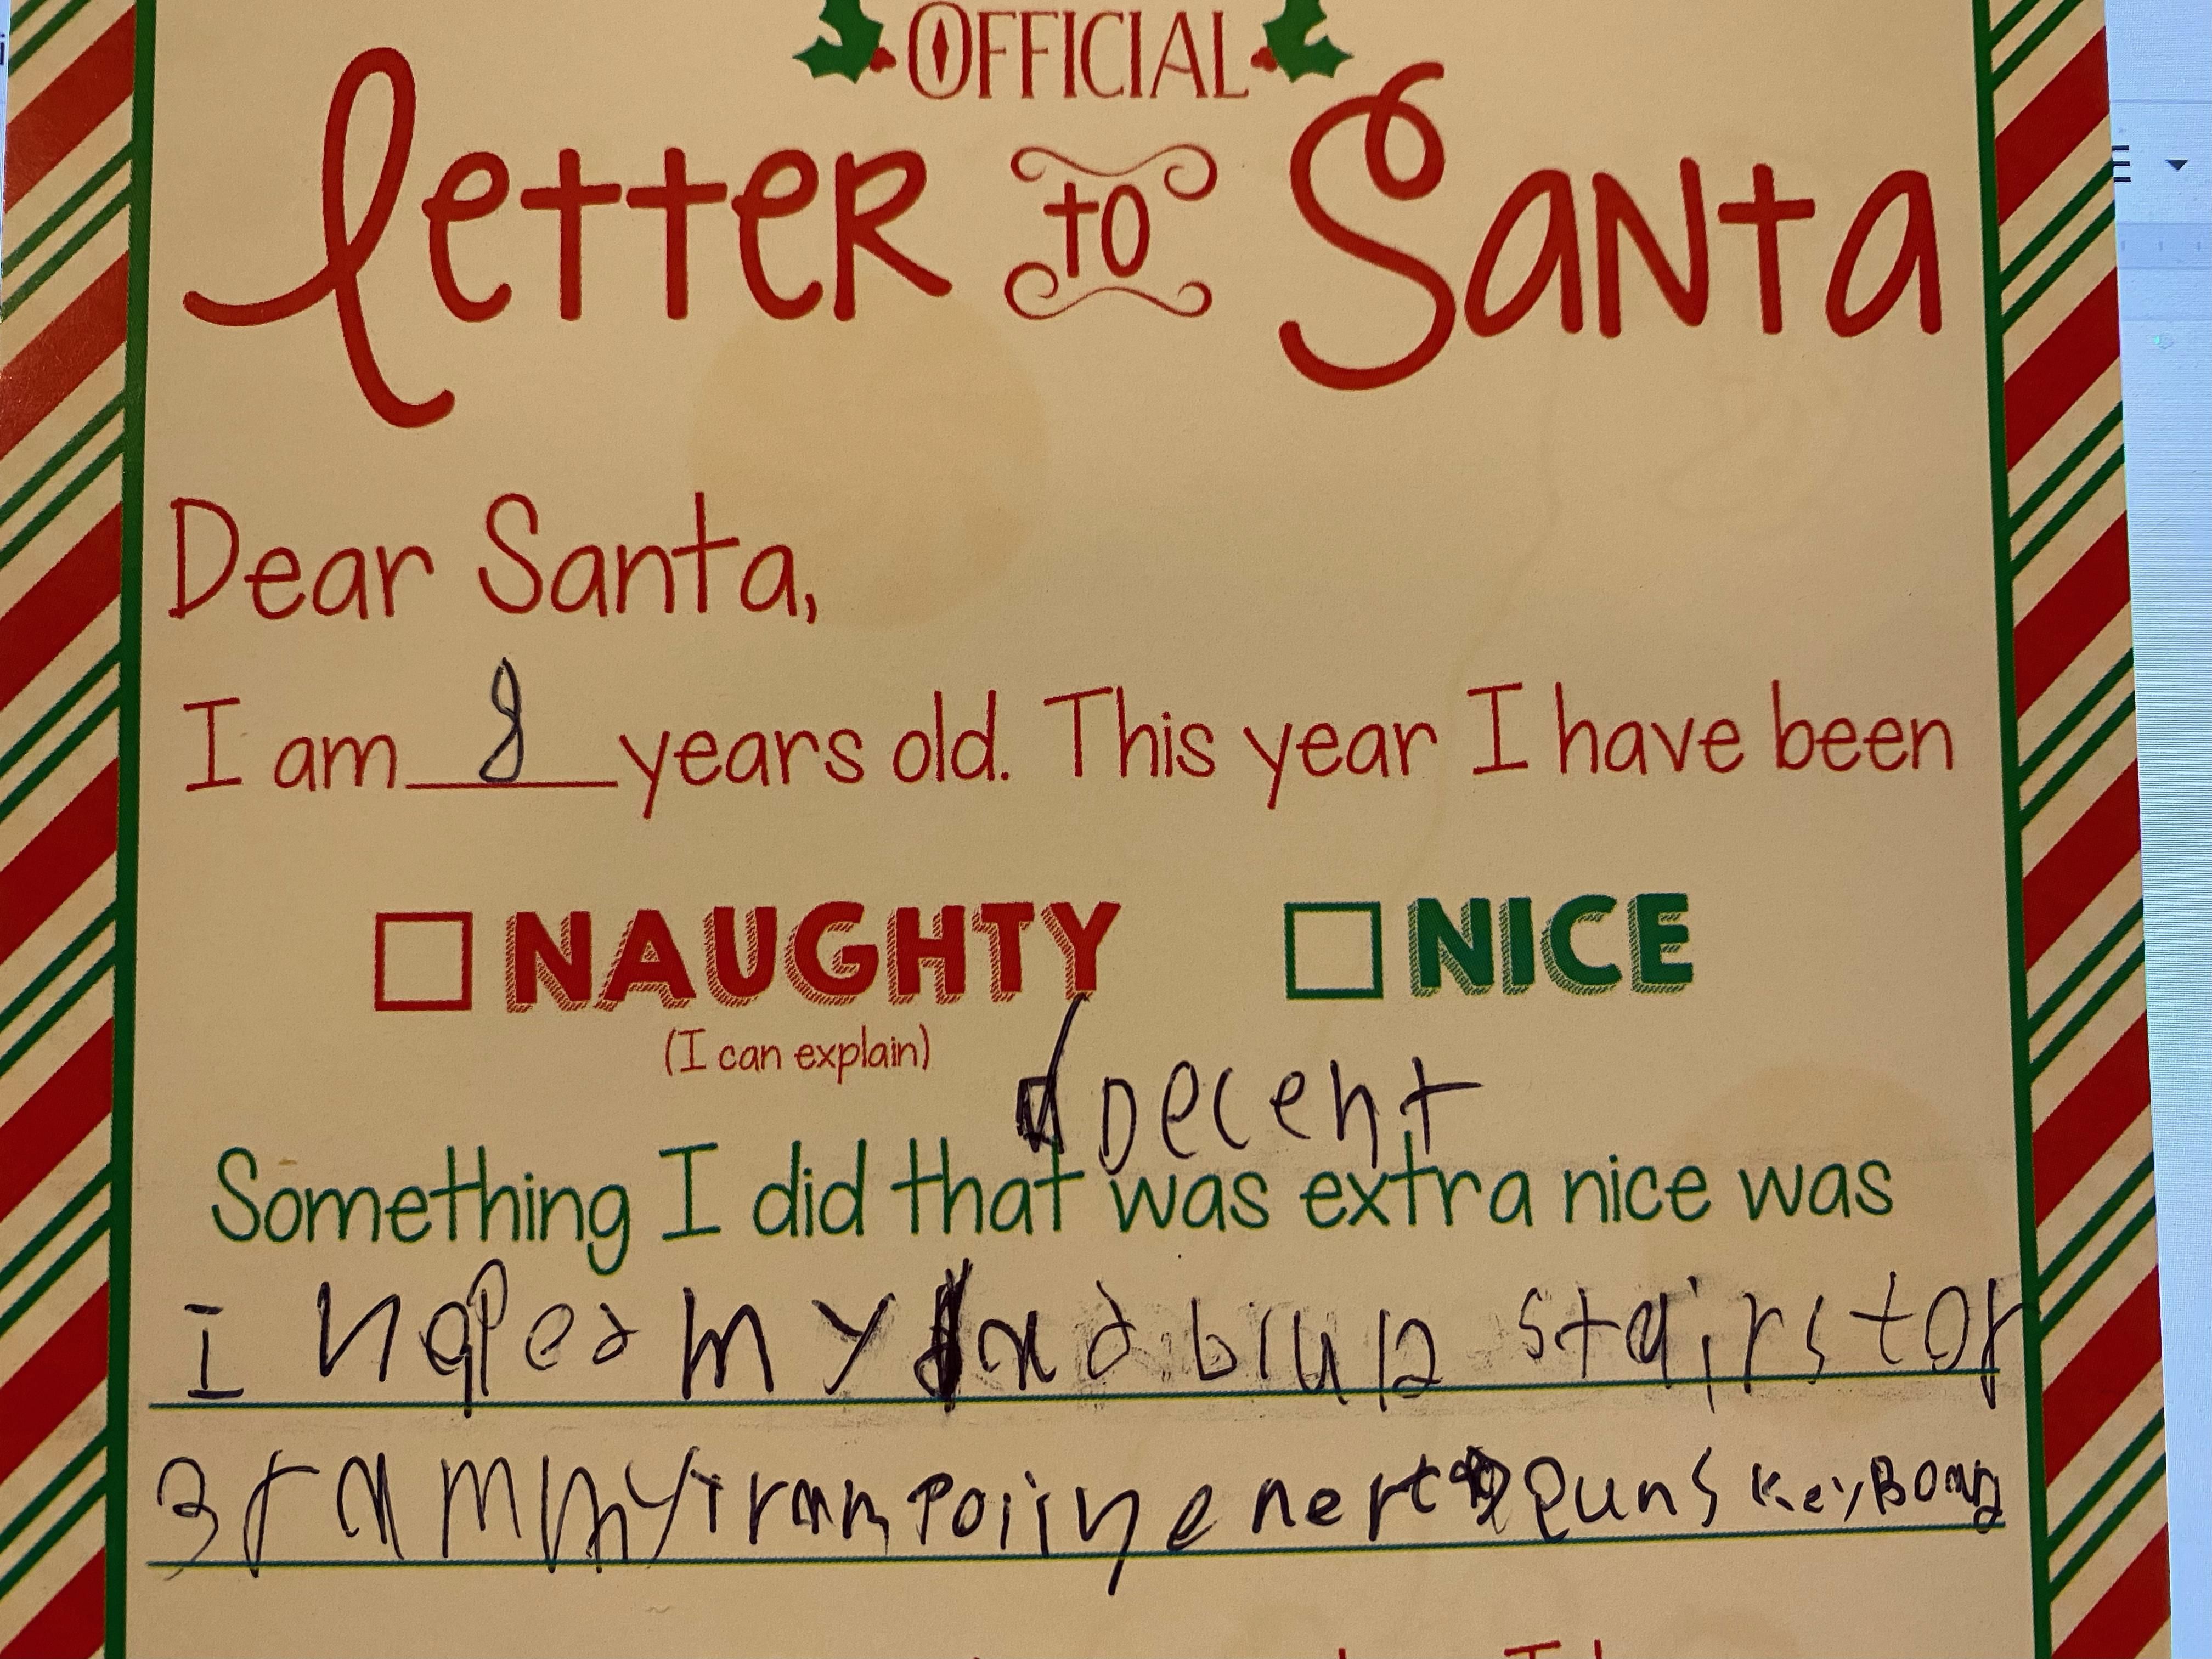 My girlfriend writes Santa letters to kids who write Santa a letter. This one kid was very candid with his behavior this year.